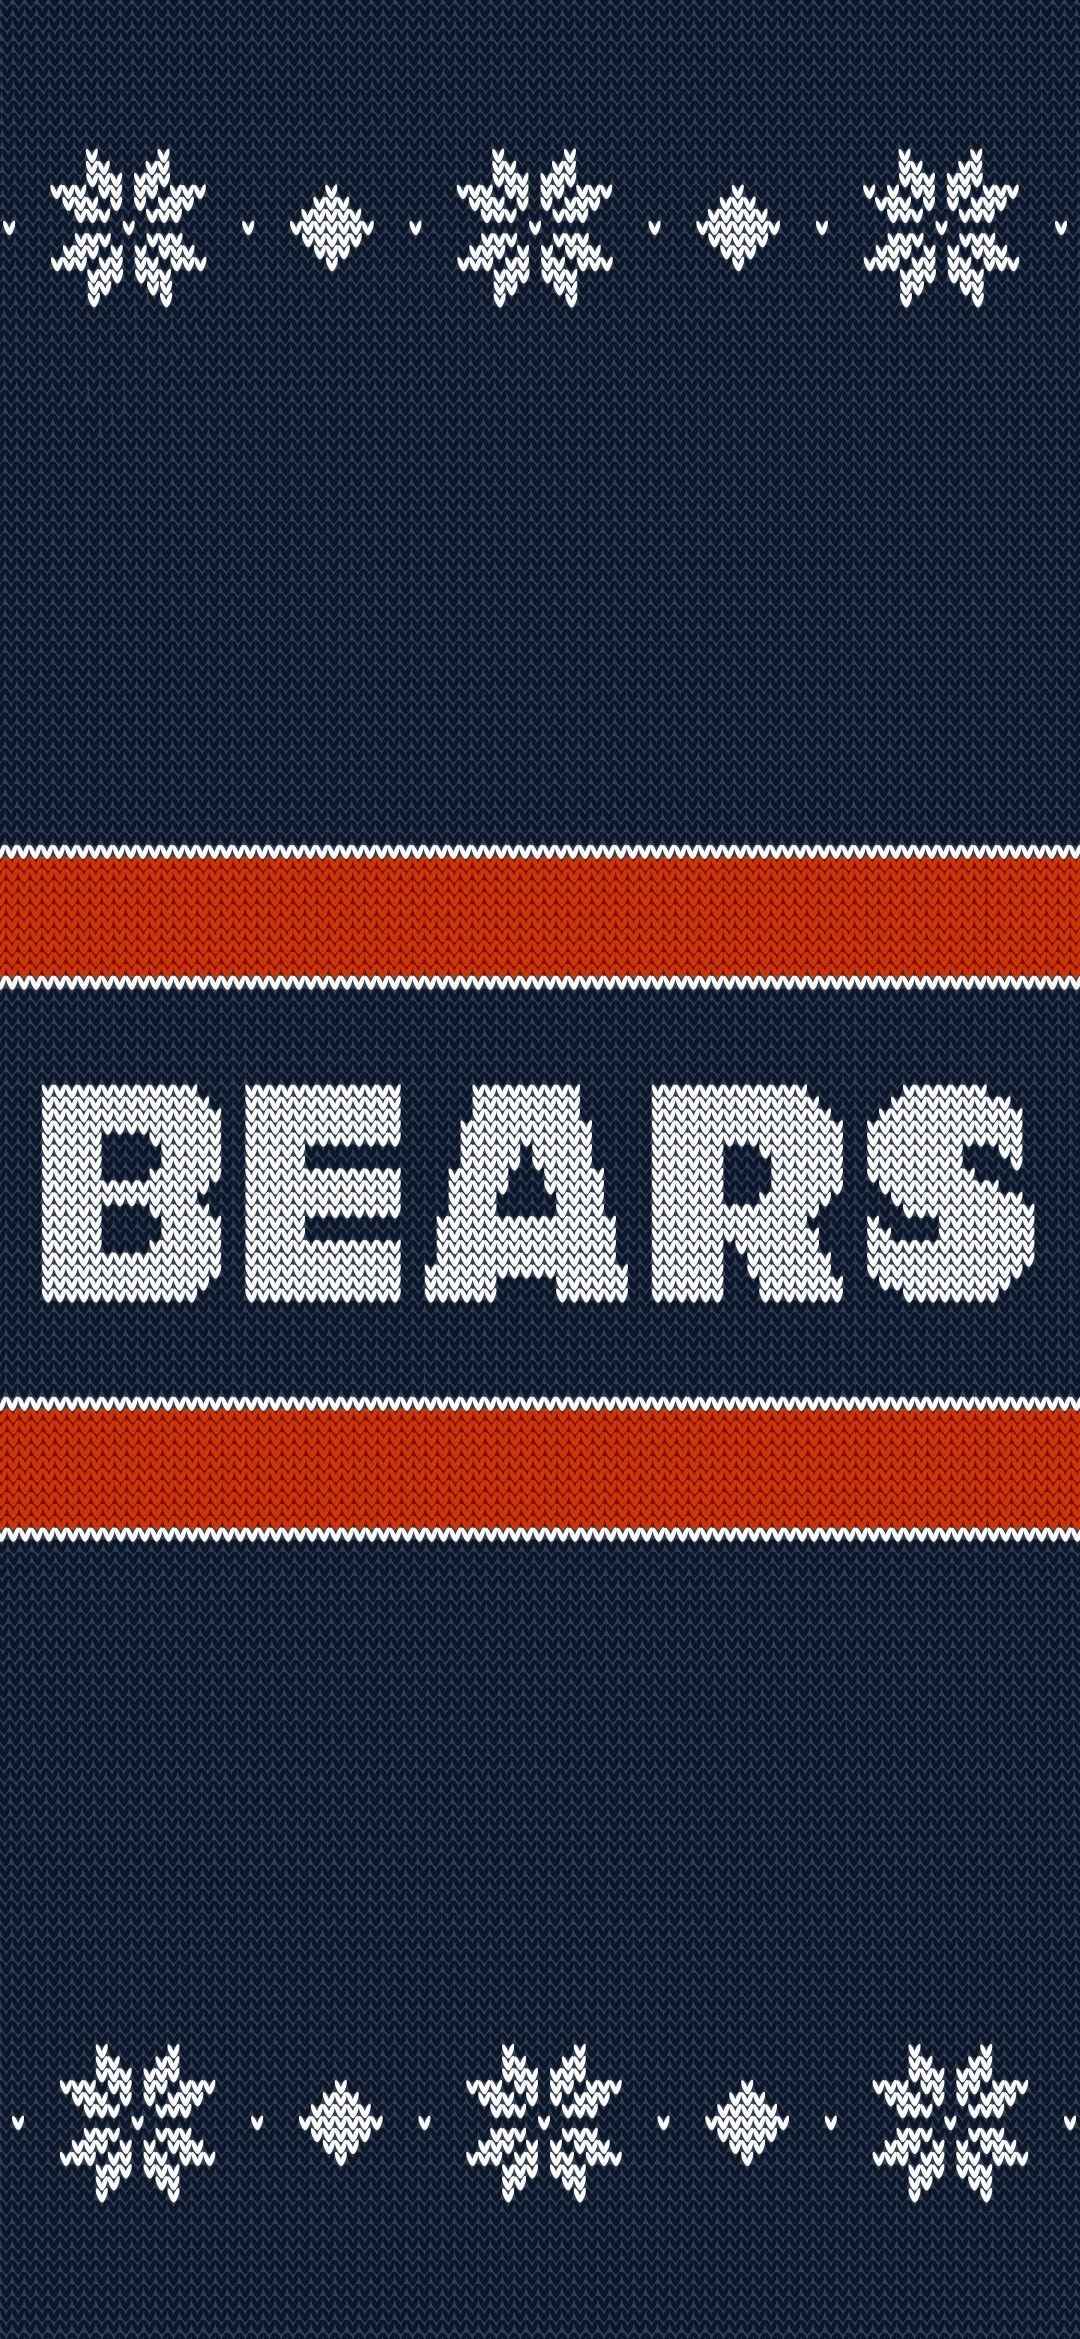 Download Chicago Bears wallpapers for mobile phone free Chicago Bears  HD pictures